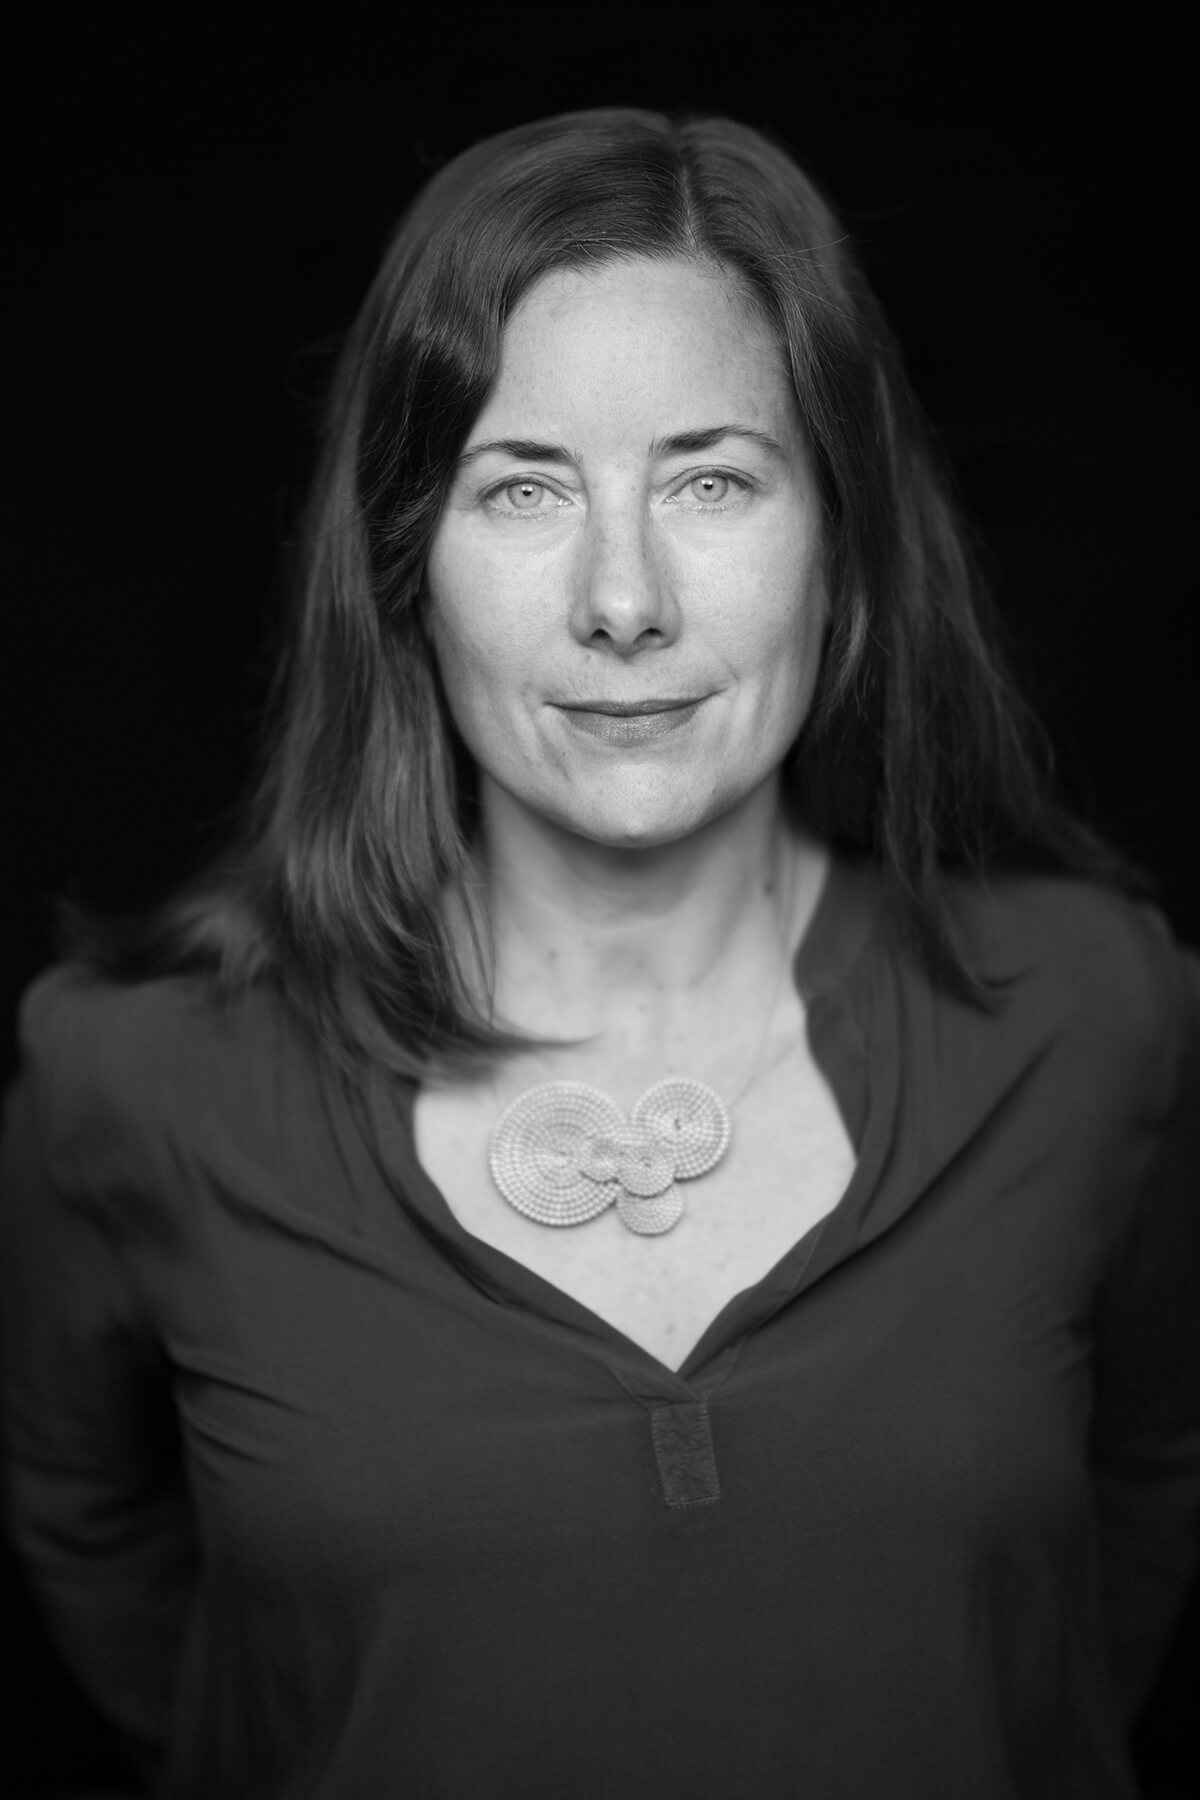 Jennifer Redfearn looks directly at the camera; the background is completely dark. Black and white portrait.